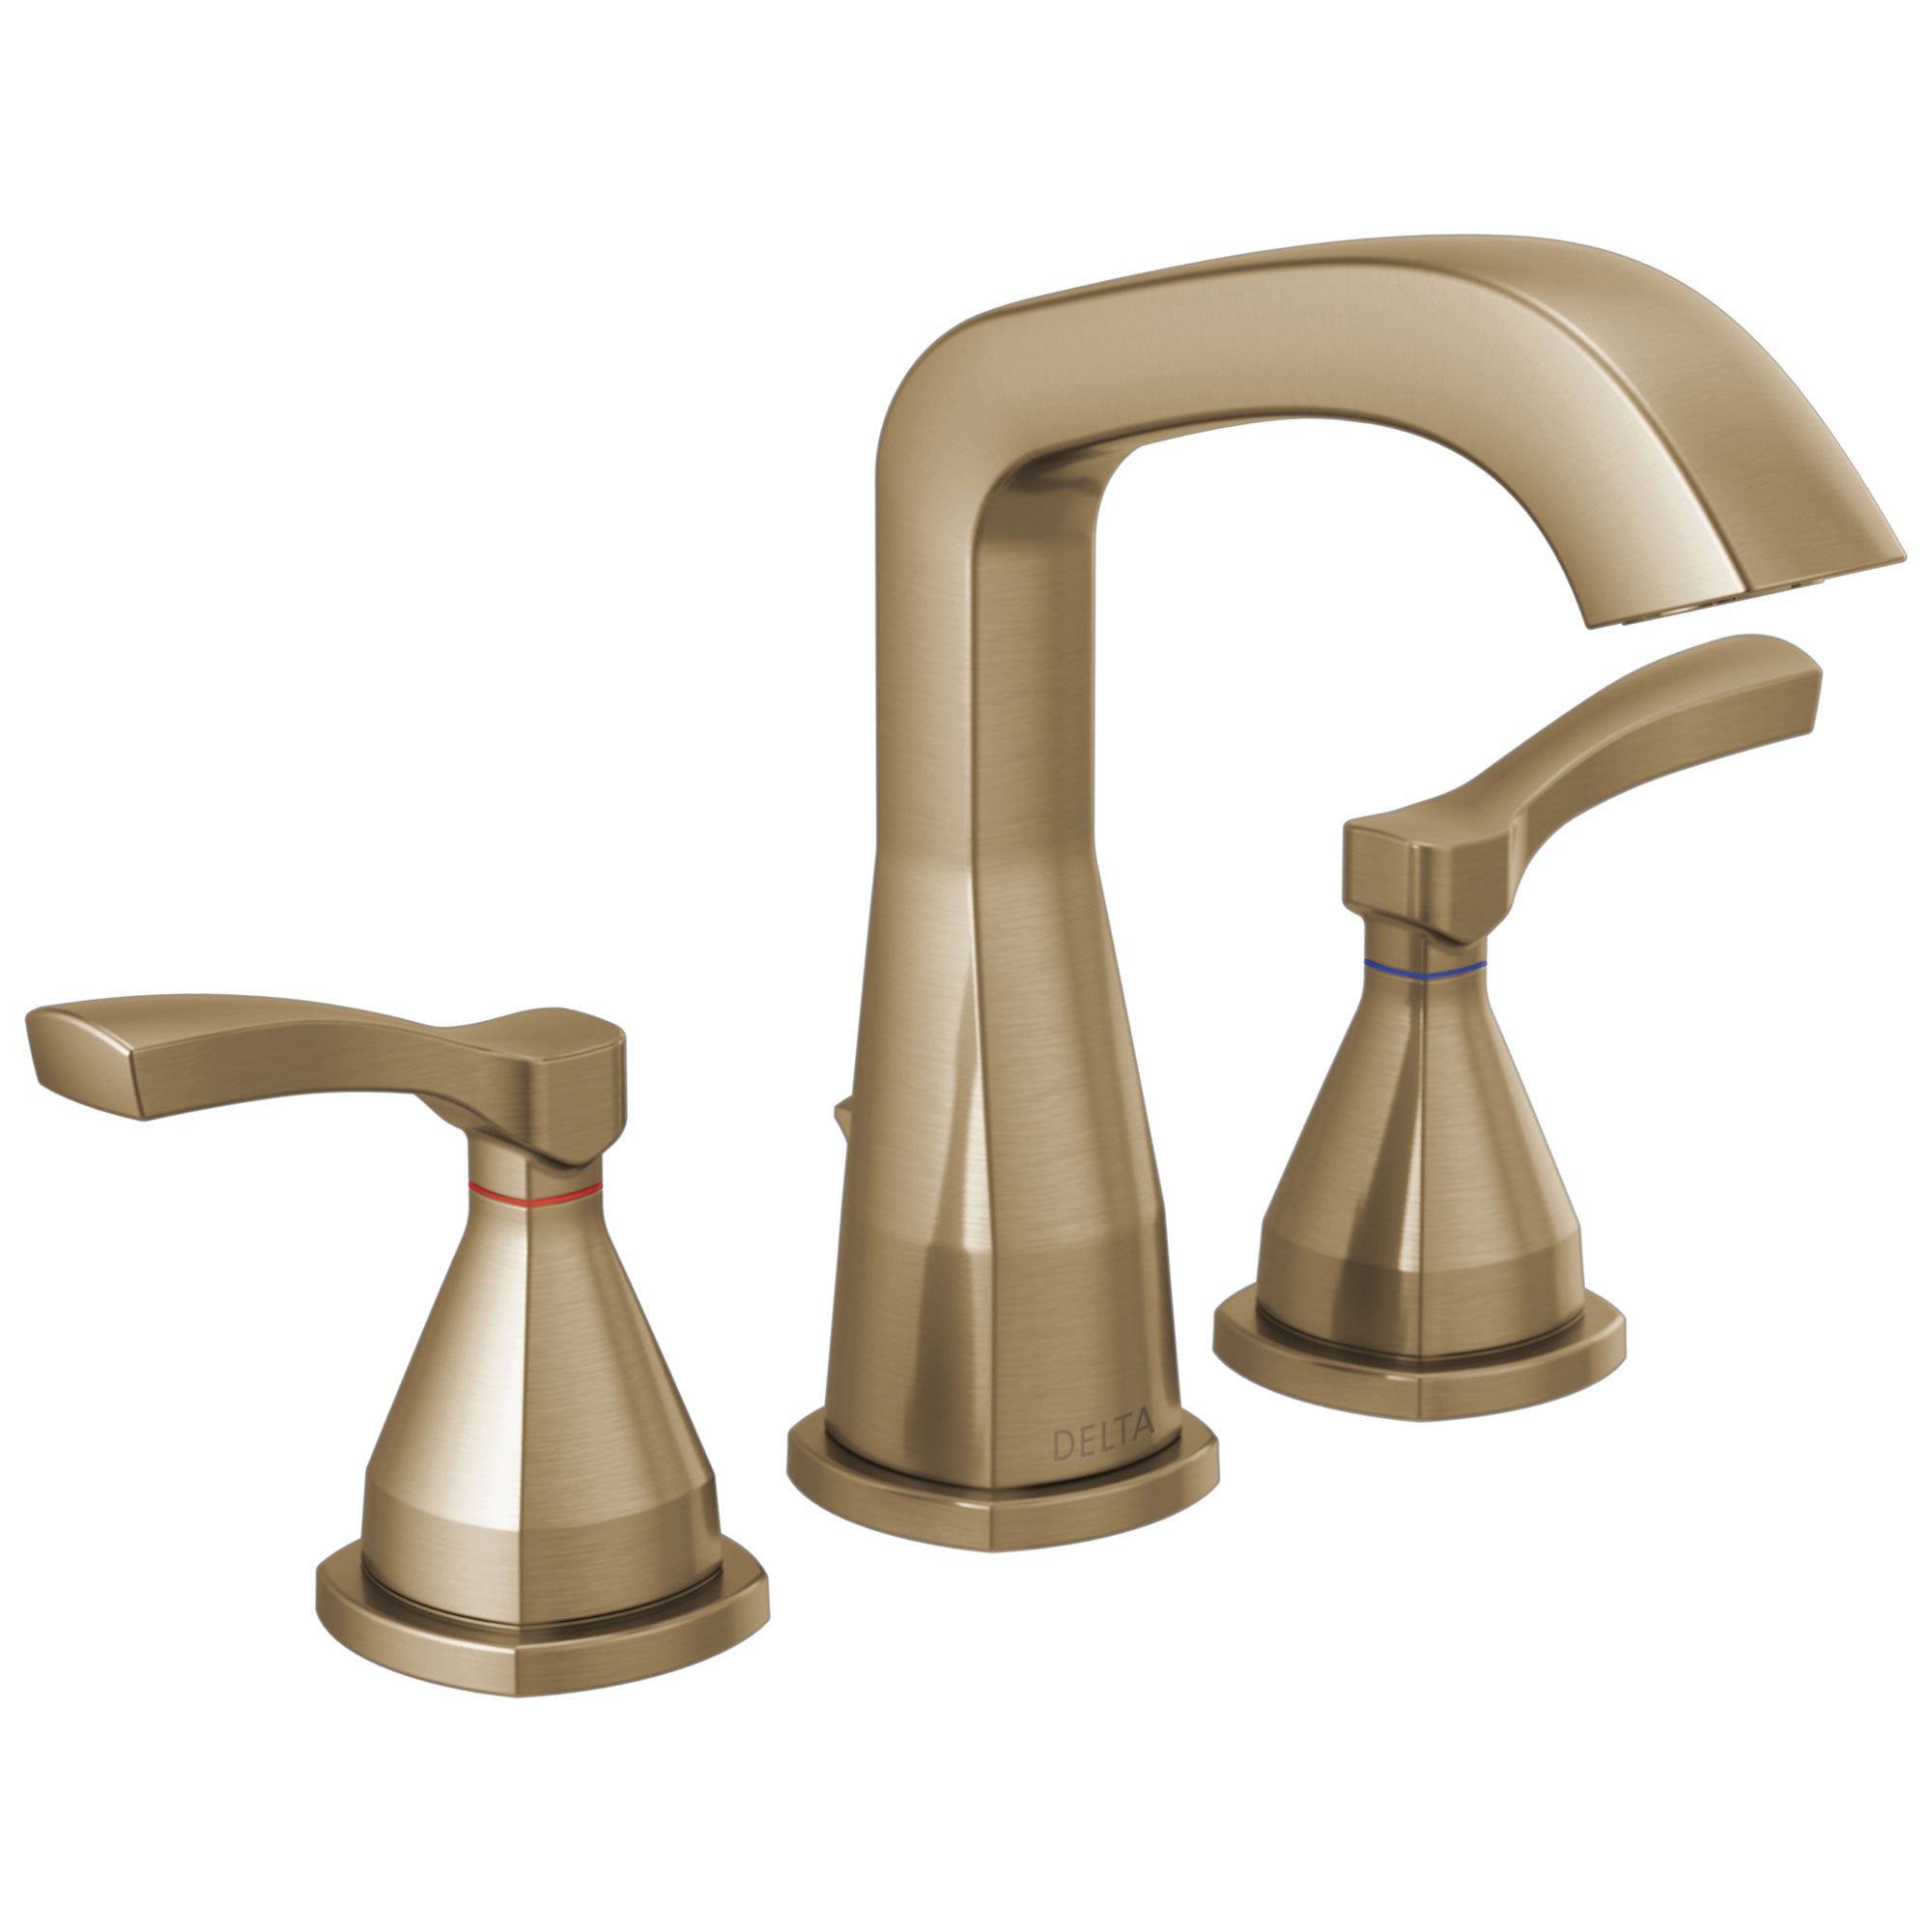 Delta Stryke Champagne Bronze Finish Widespread Bathroom Sink Faucet with Matching Drain and Lever Handles D35776CZMPUDST